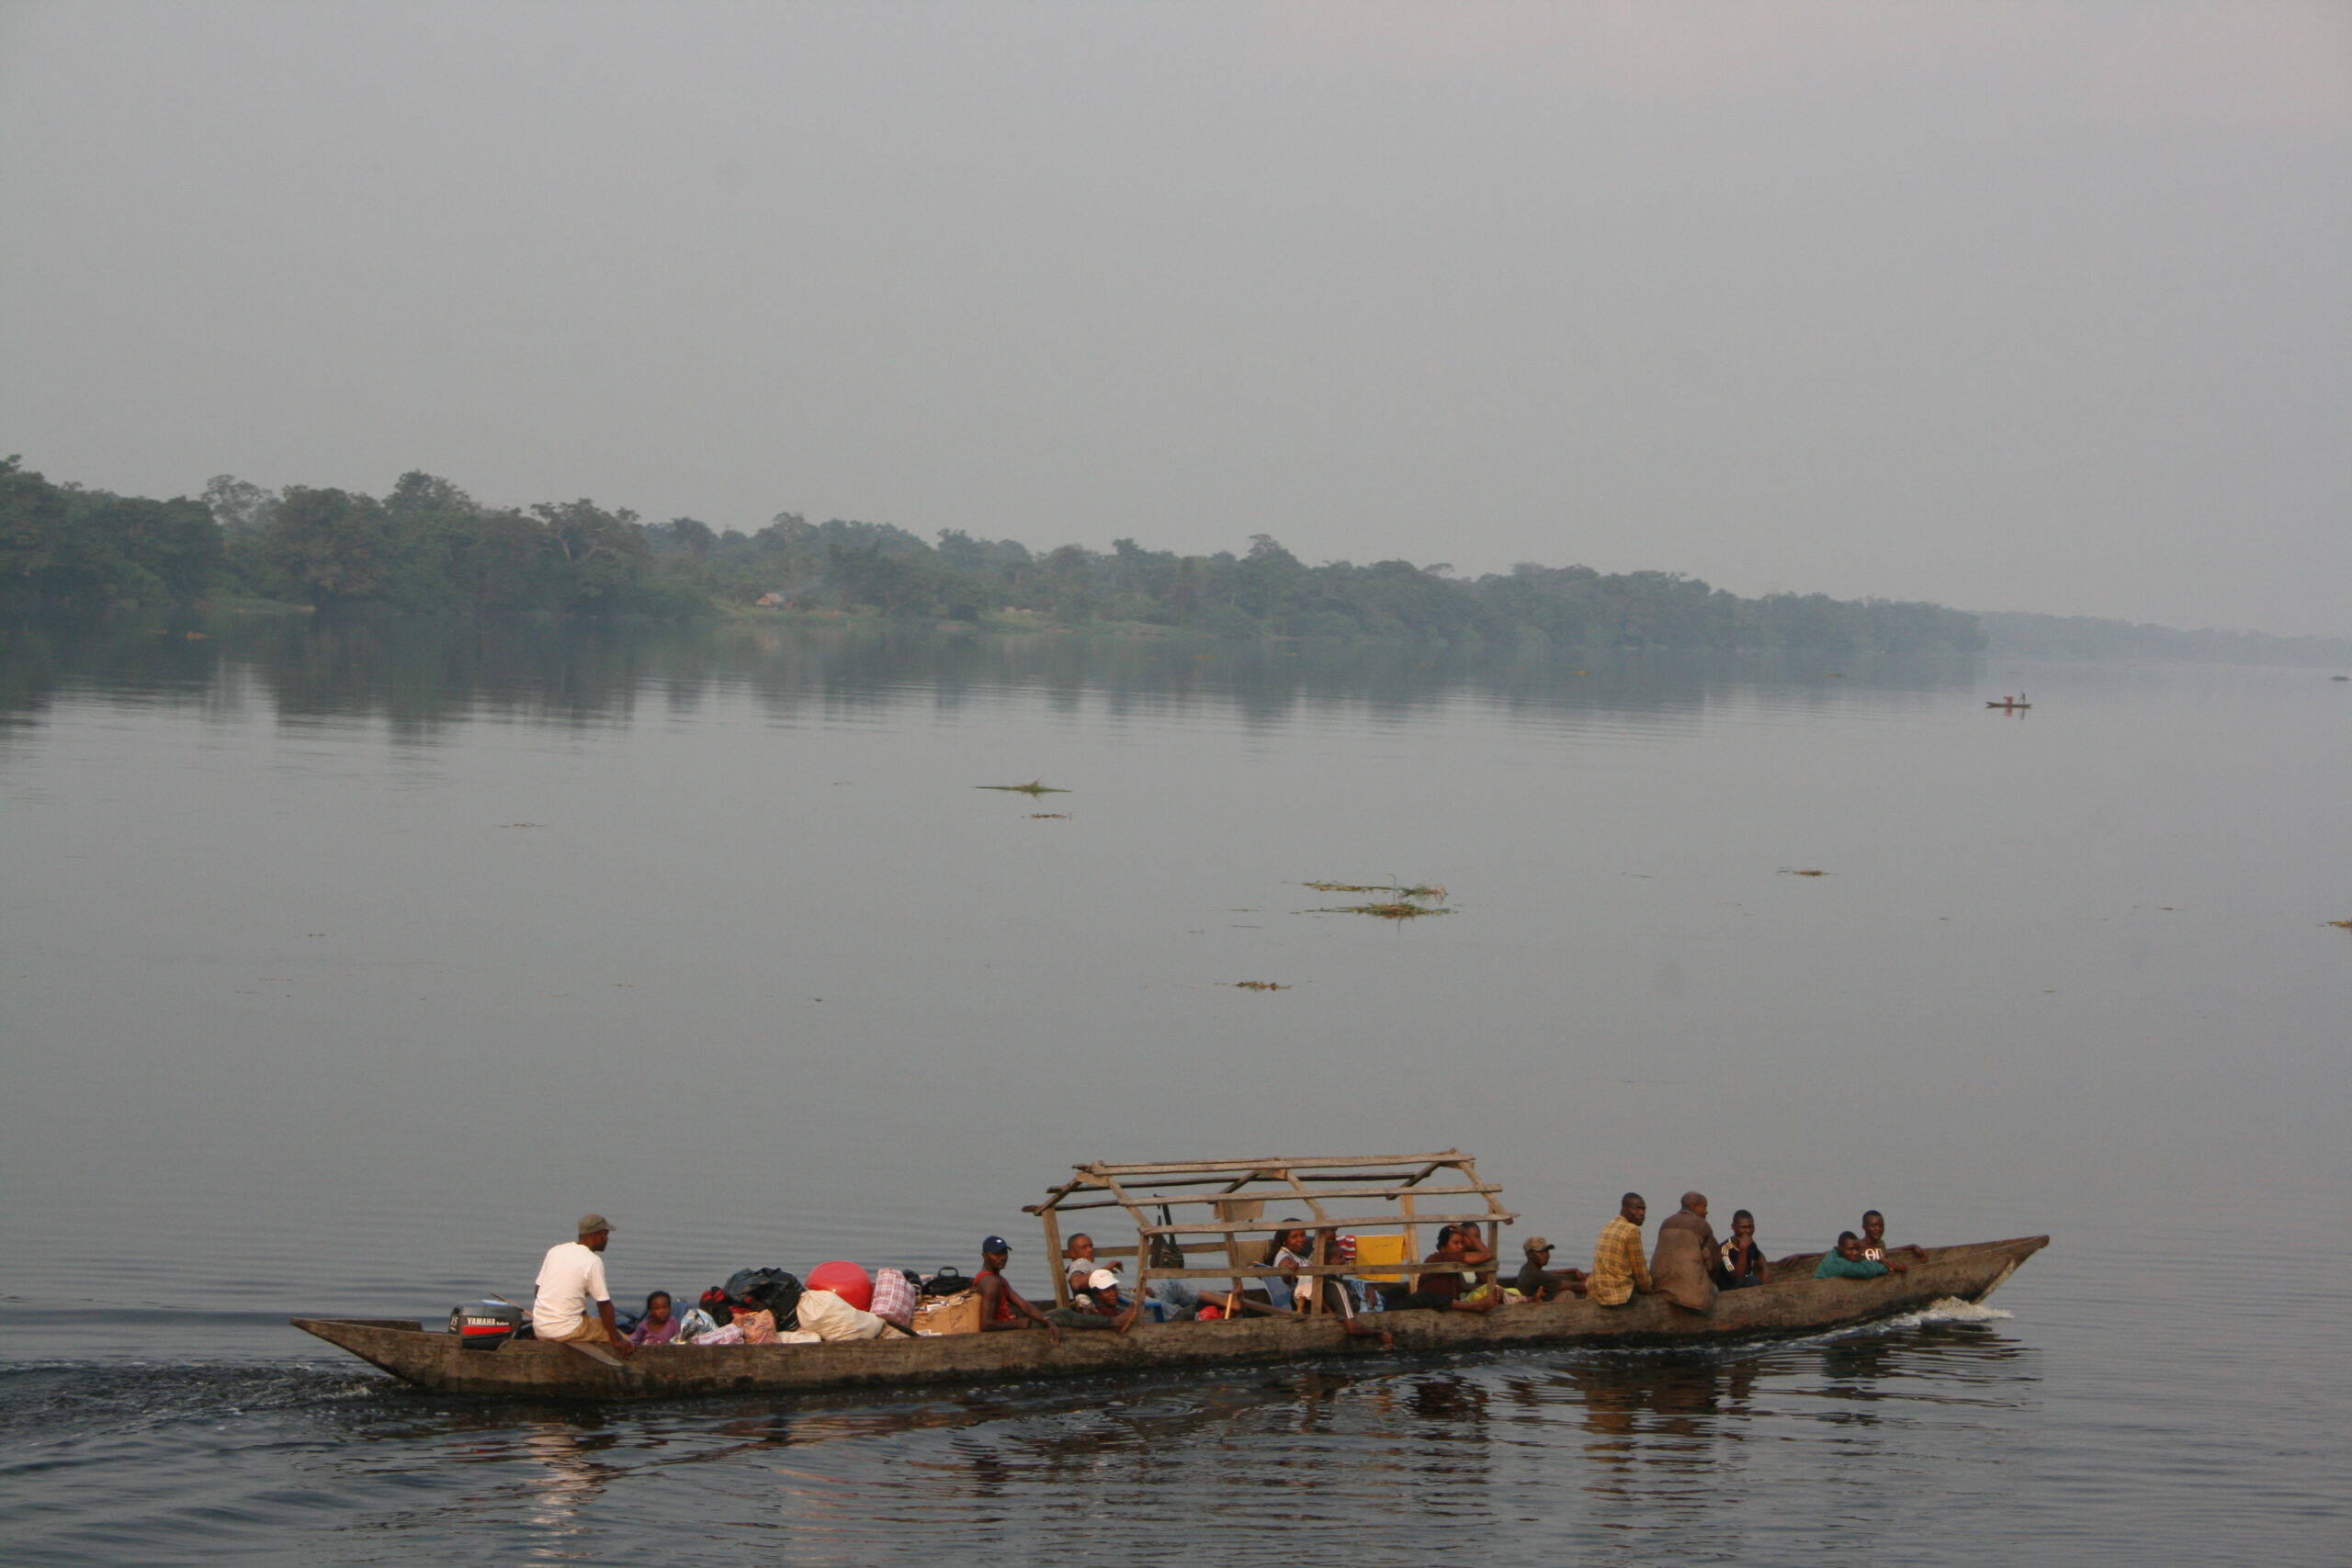 Many people in pirogue